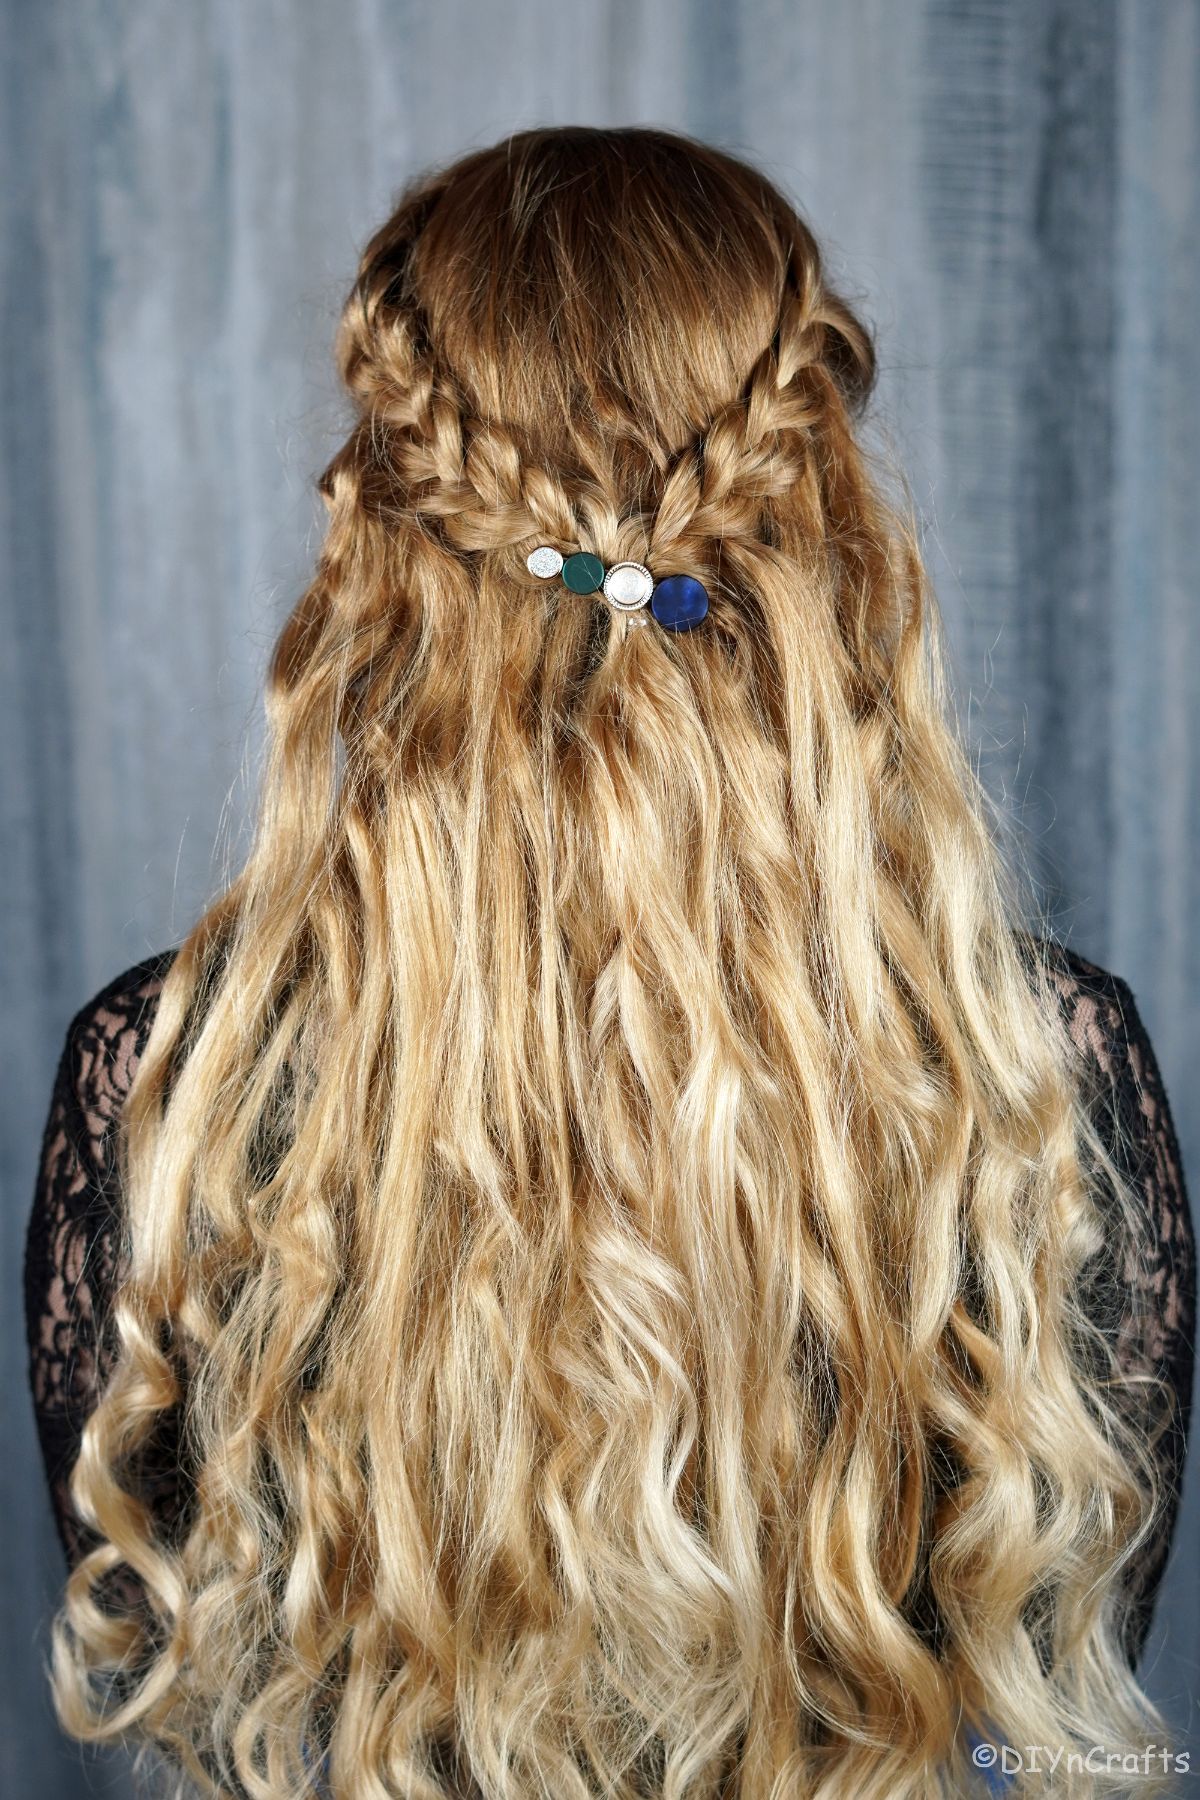 back of braided crown half up half down hairstyle on blonde woman in black shirt